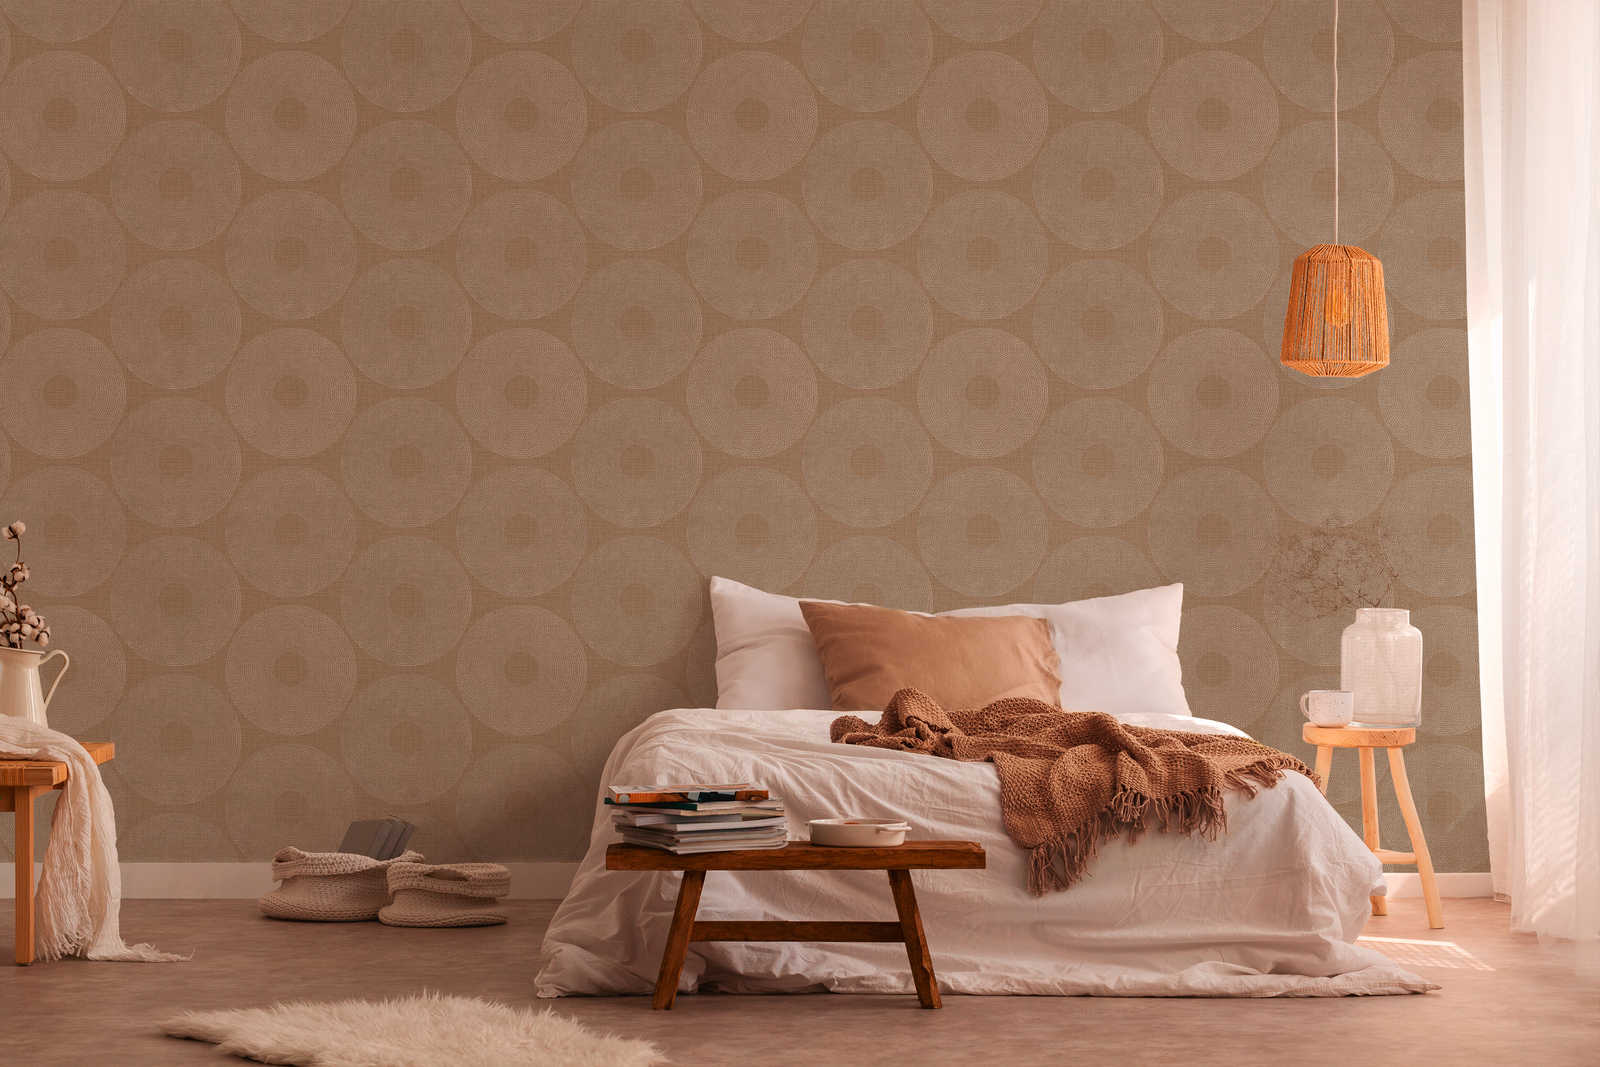             Metallic wallpaper circles with structure design - brown
        